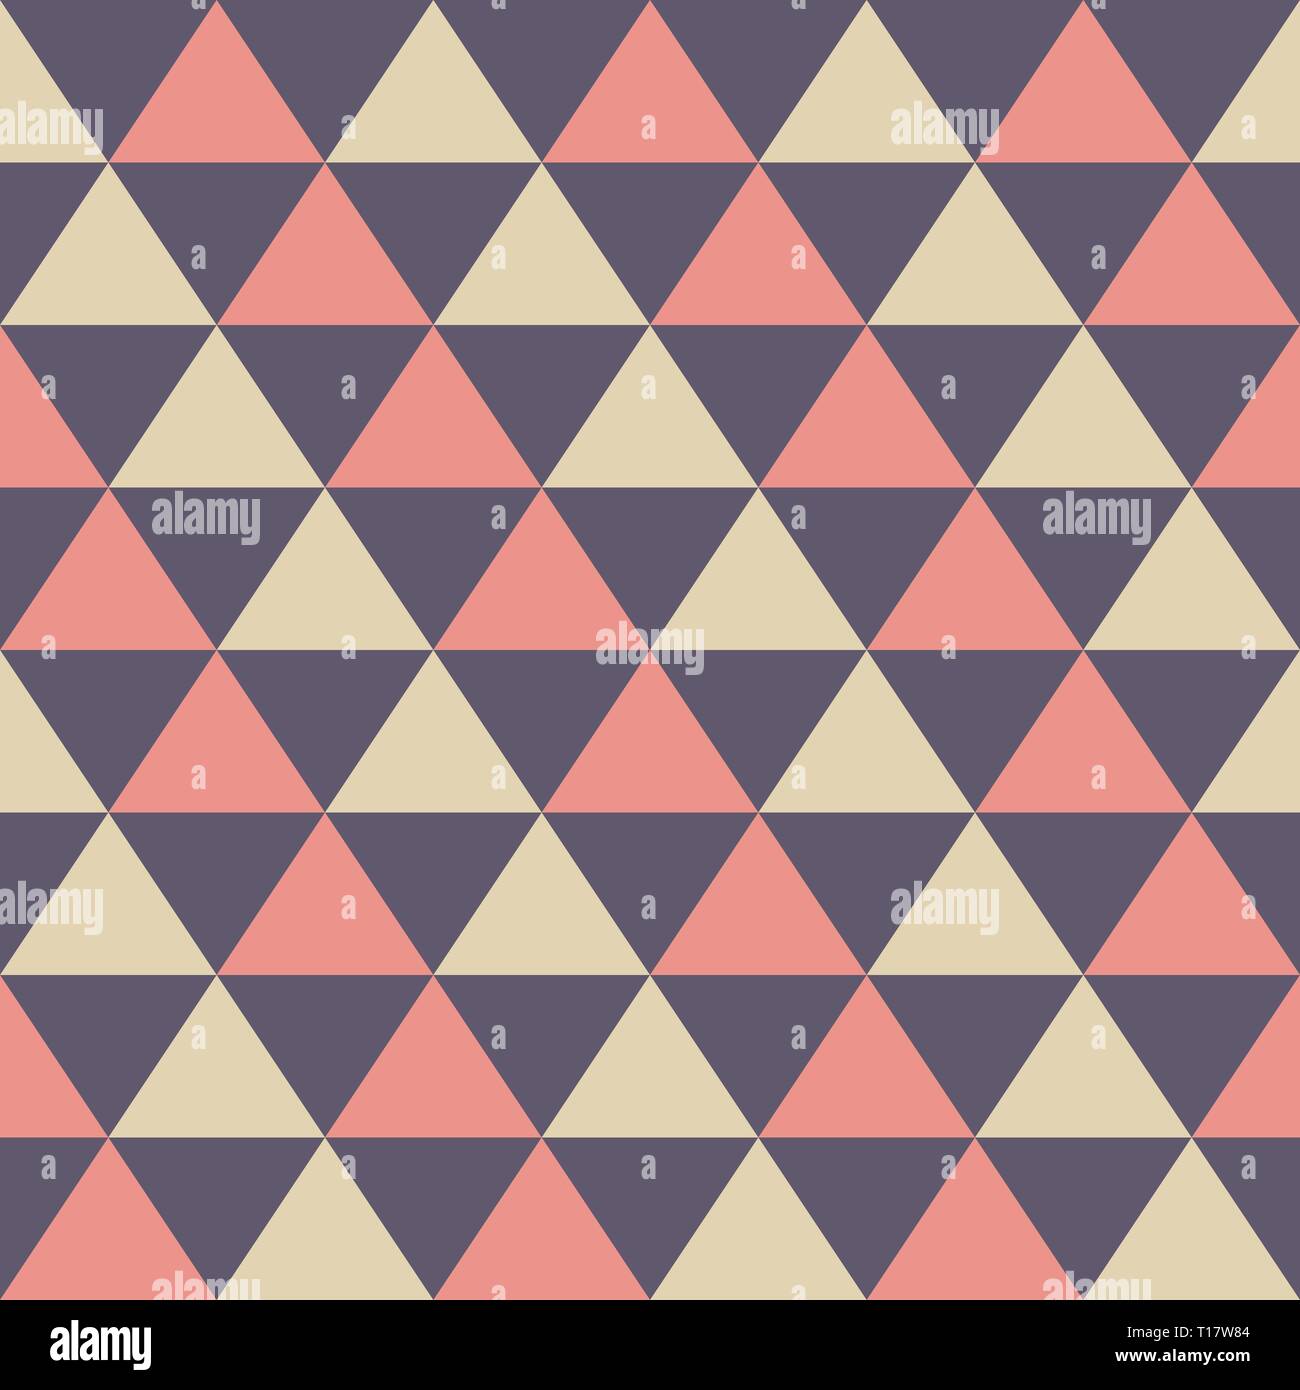 https://c8.alamy.com/comp/T17W84/abstract-seamless-pattern-of-color-triangles-modern-stylish-elegant-texture-repeating-geometric-tiles-design-for-print-fabric-cloth-textile-T17W84.jpg